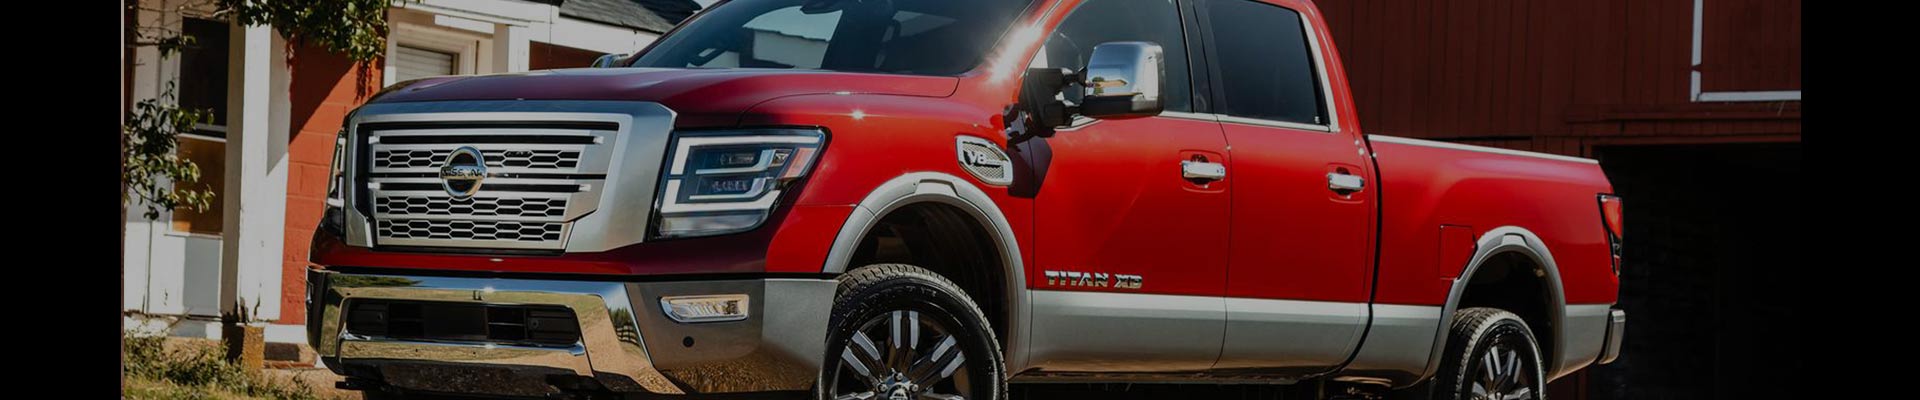 Shop Replacement and OEM 2018 Nissan Titan XD Parts with Discounted Price on the Net